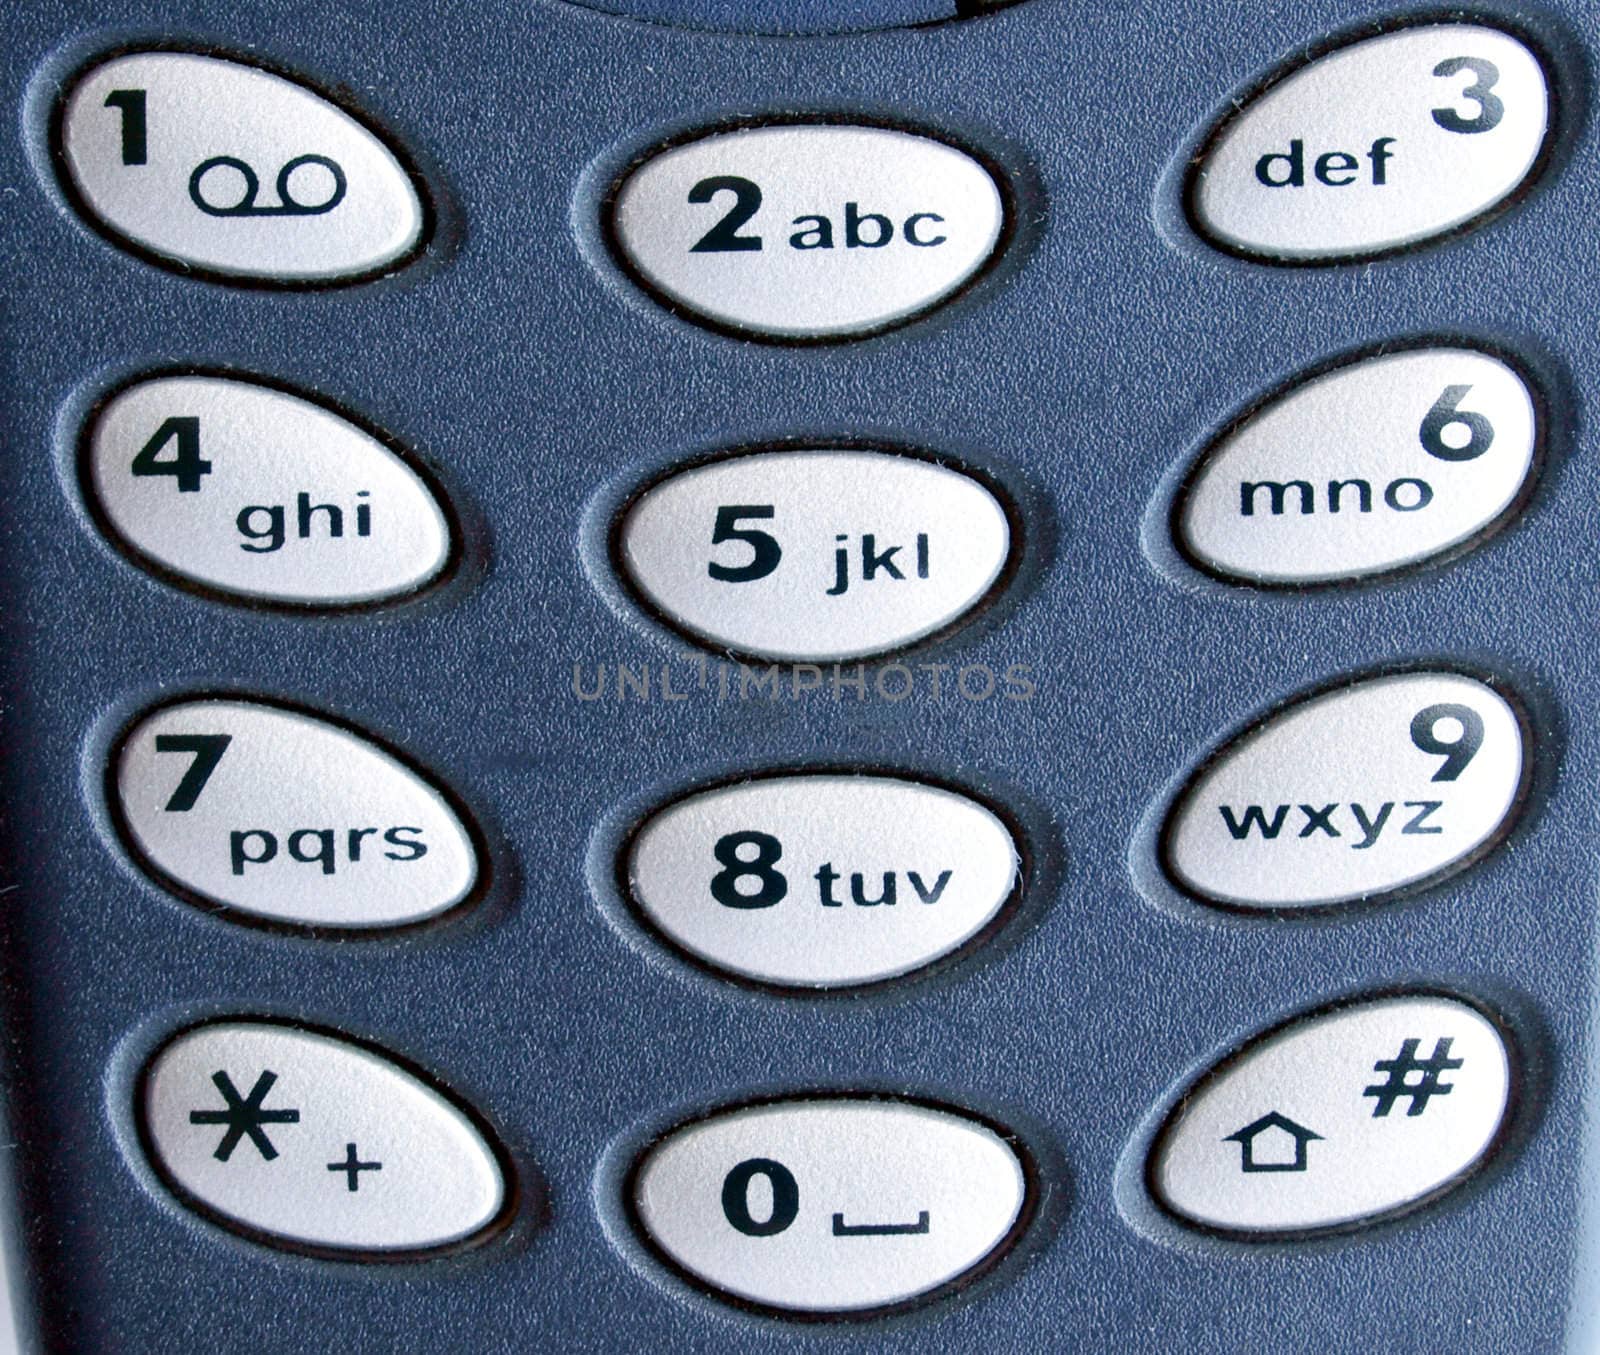 Mobile phone keypad by paolo77